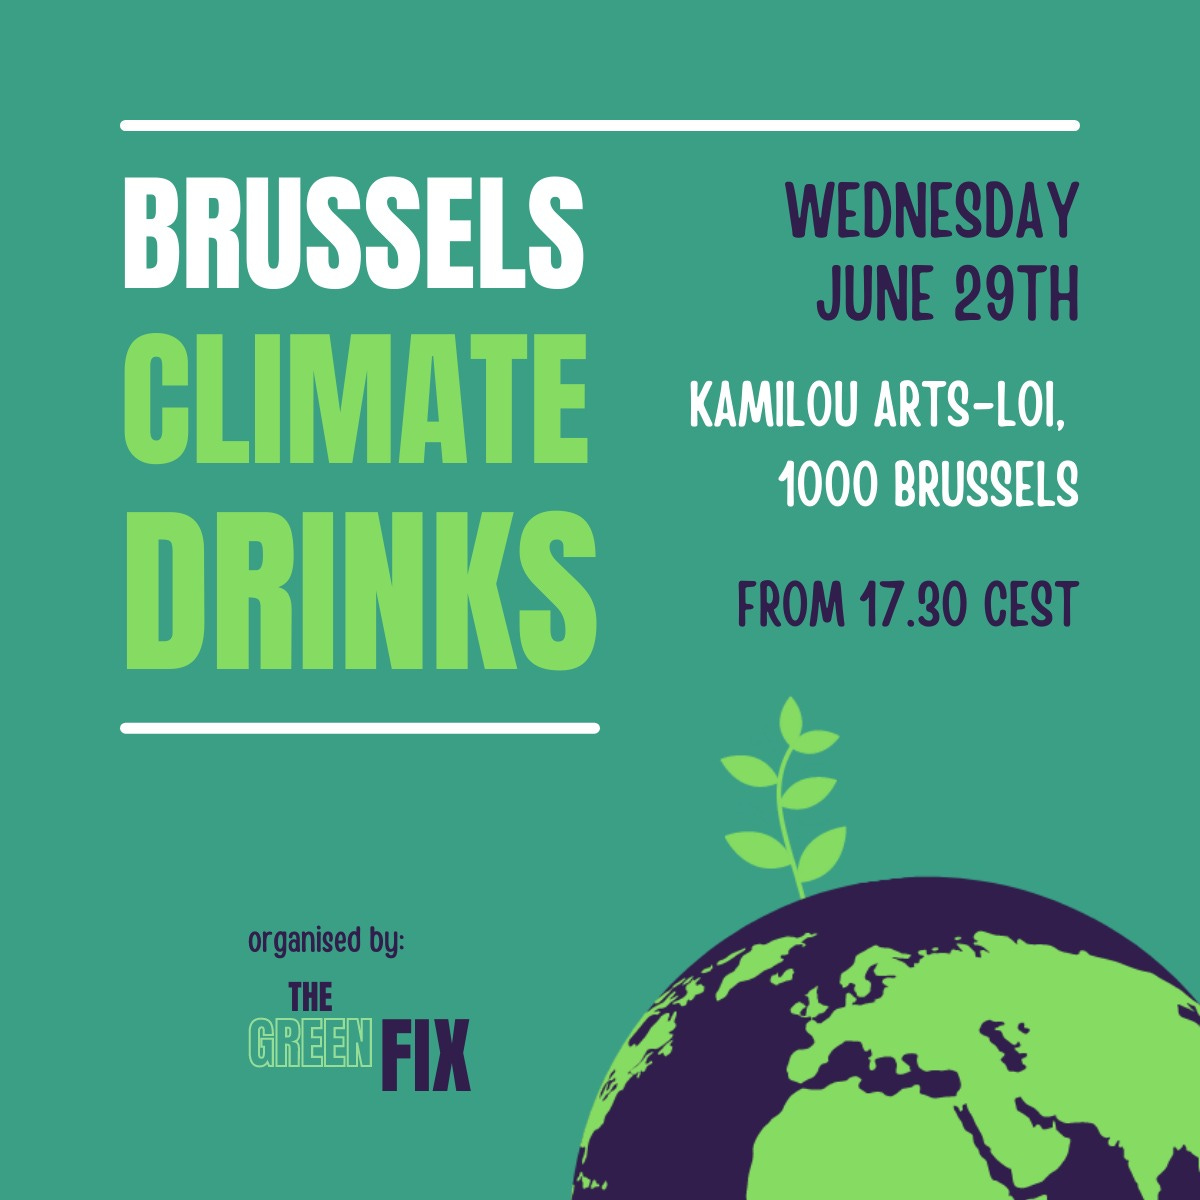 Graphic for event 'Brussels Climate Drinks' on 29 June, from 17h30 CEST in Kamilou, Arts-Loi.